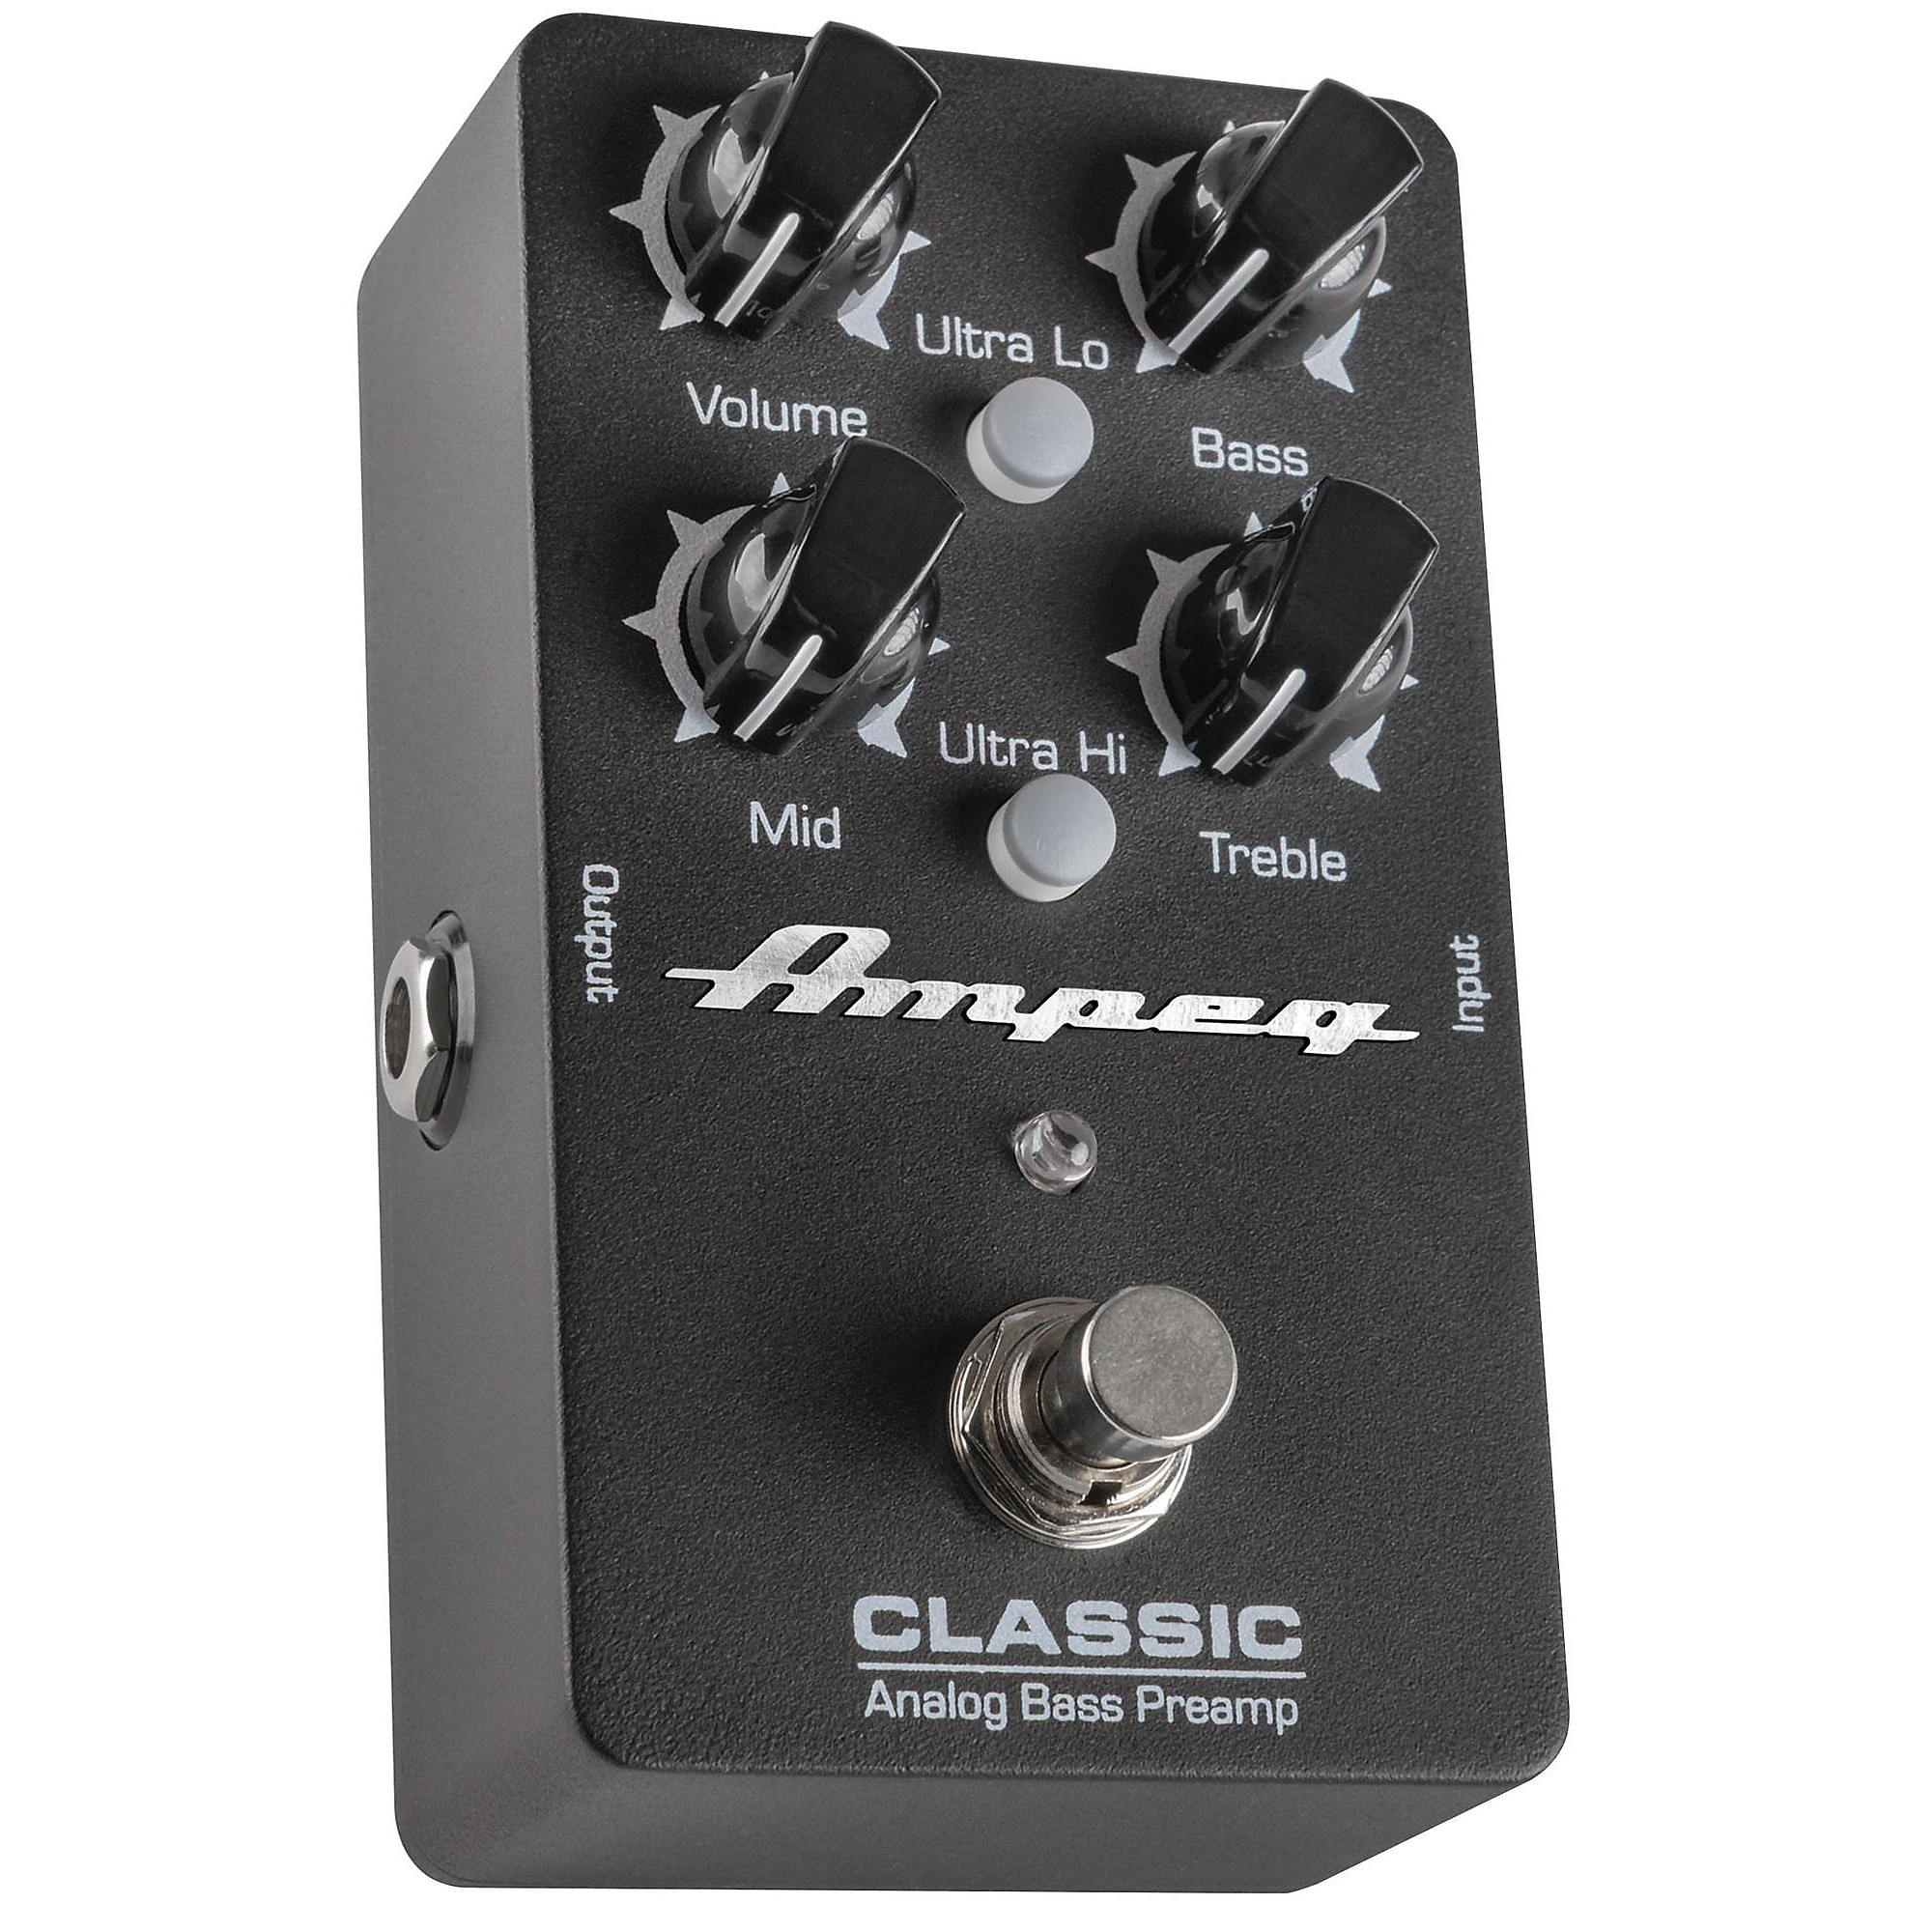 Ampeg Classic Analog Bass Preamp Pedal | Guitar Center